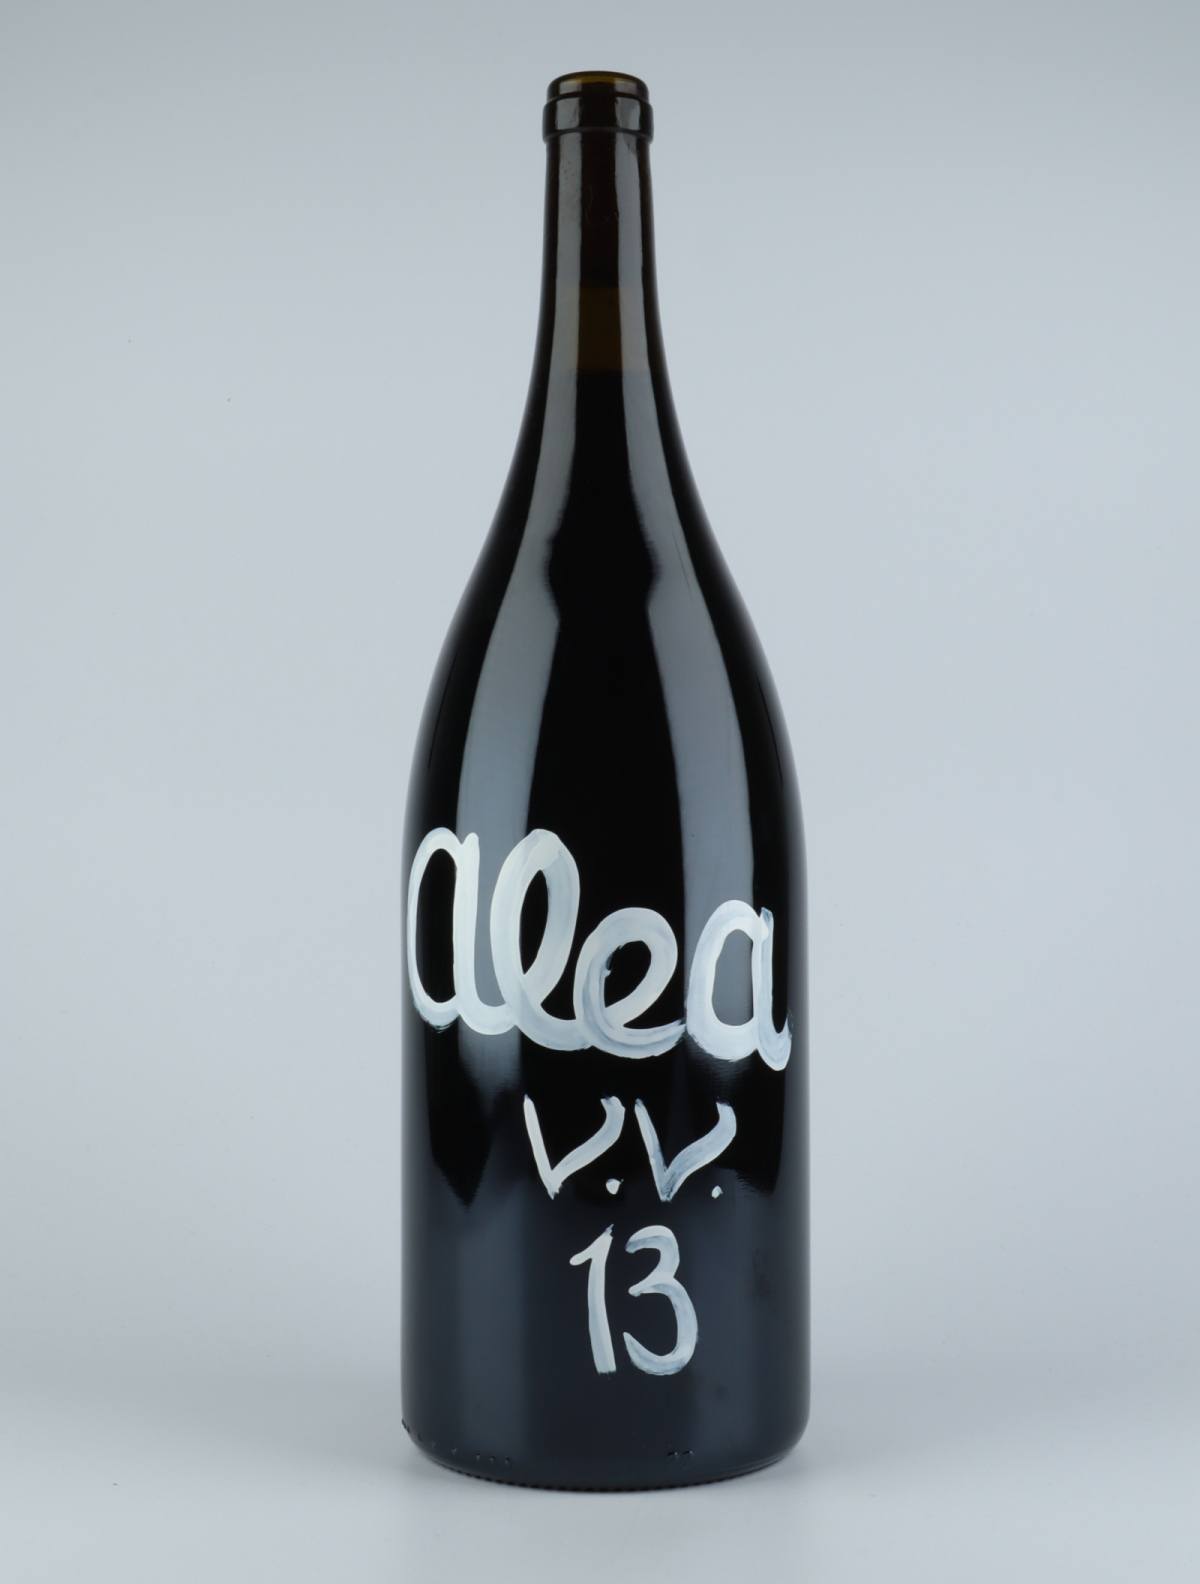 A bottle 2013 Alea VV - Magnum Red wine from Le Coste, Lazio in Italy